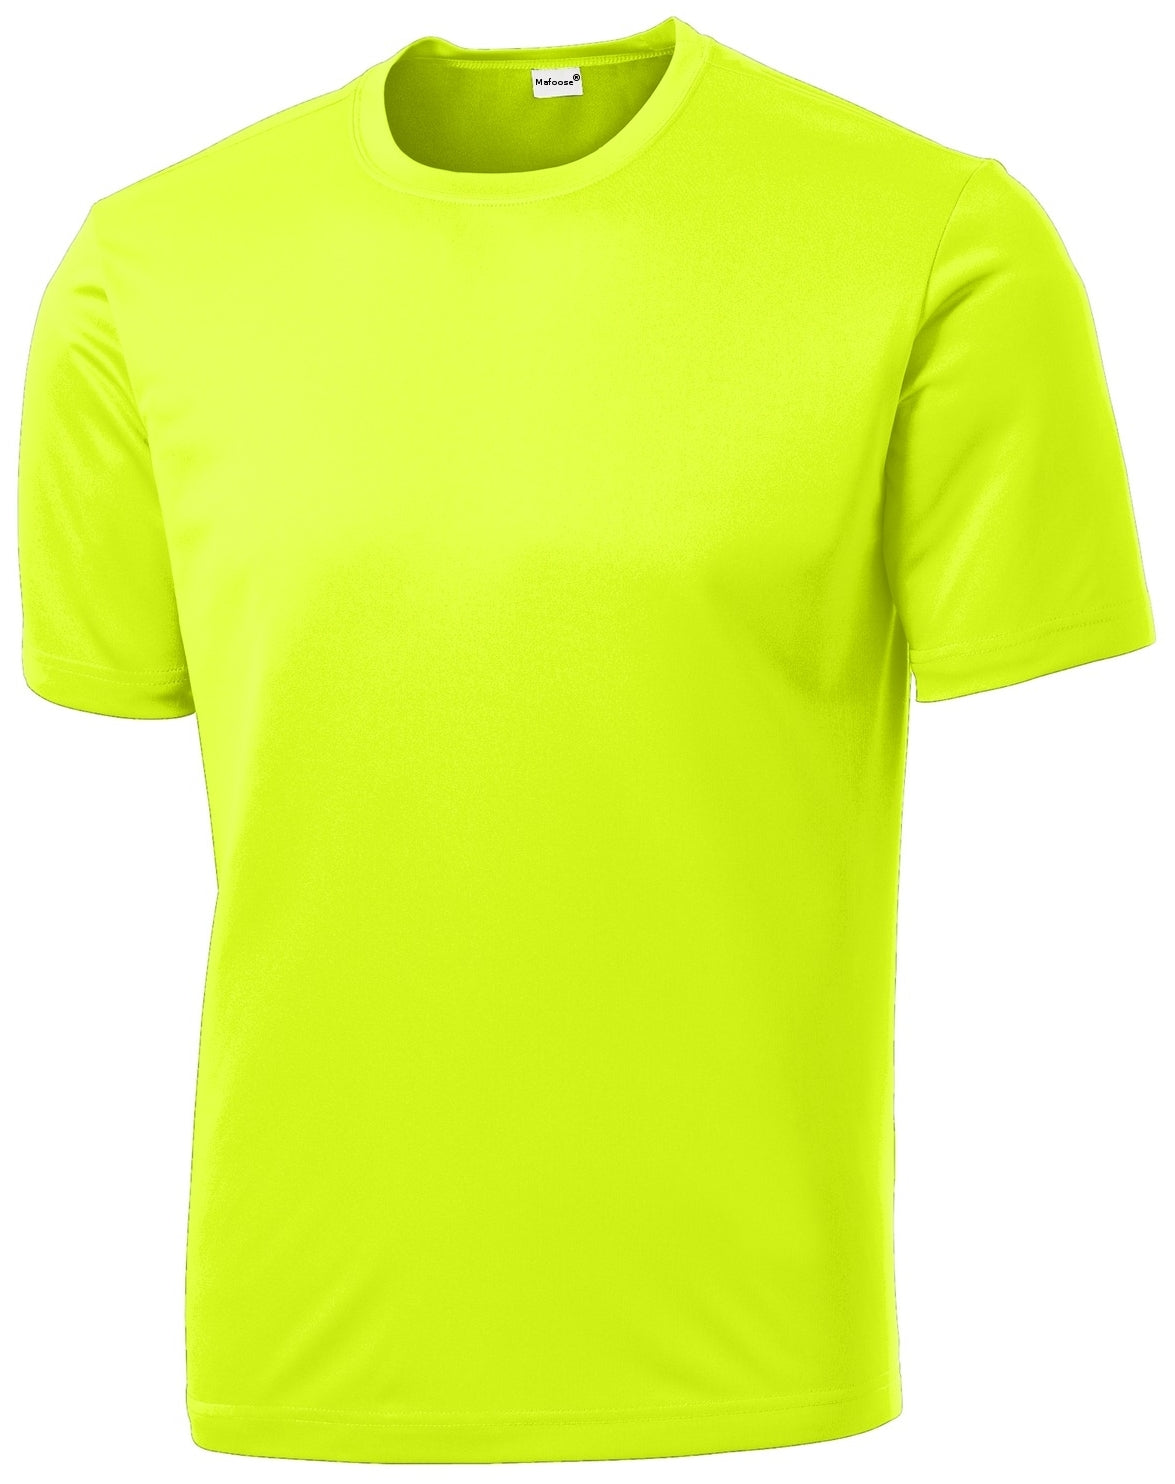 Men's PosiCharge Competitor Tee Shirt